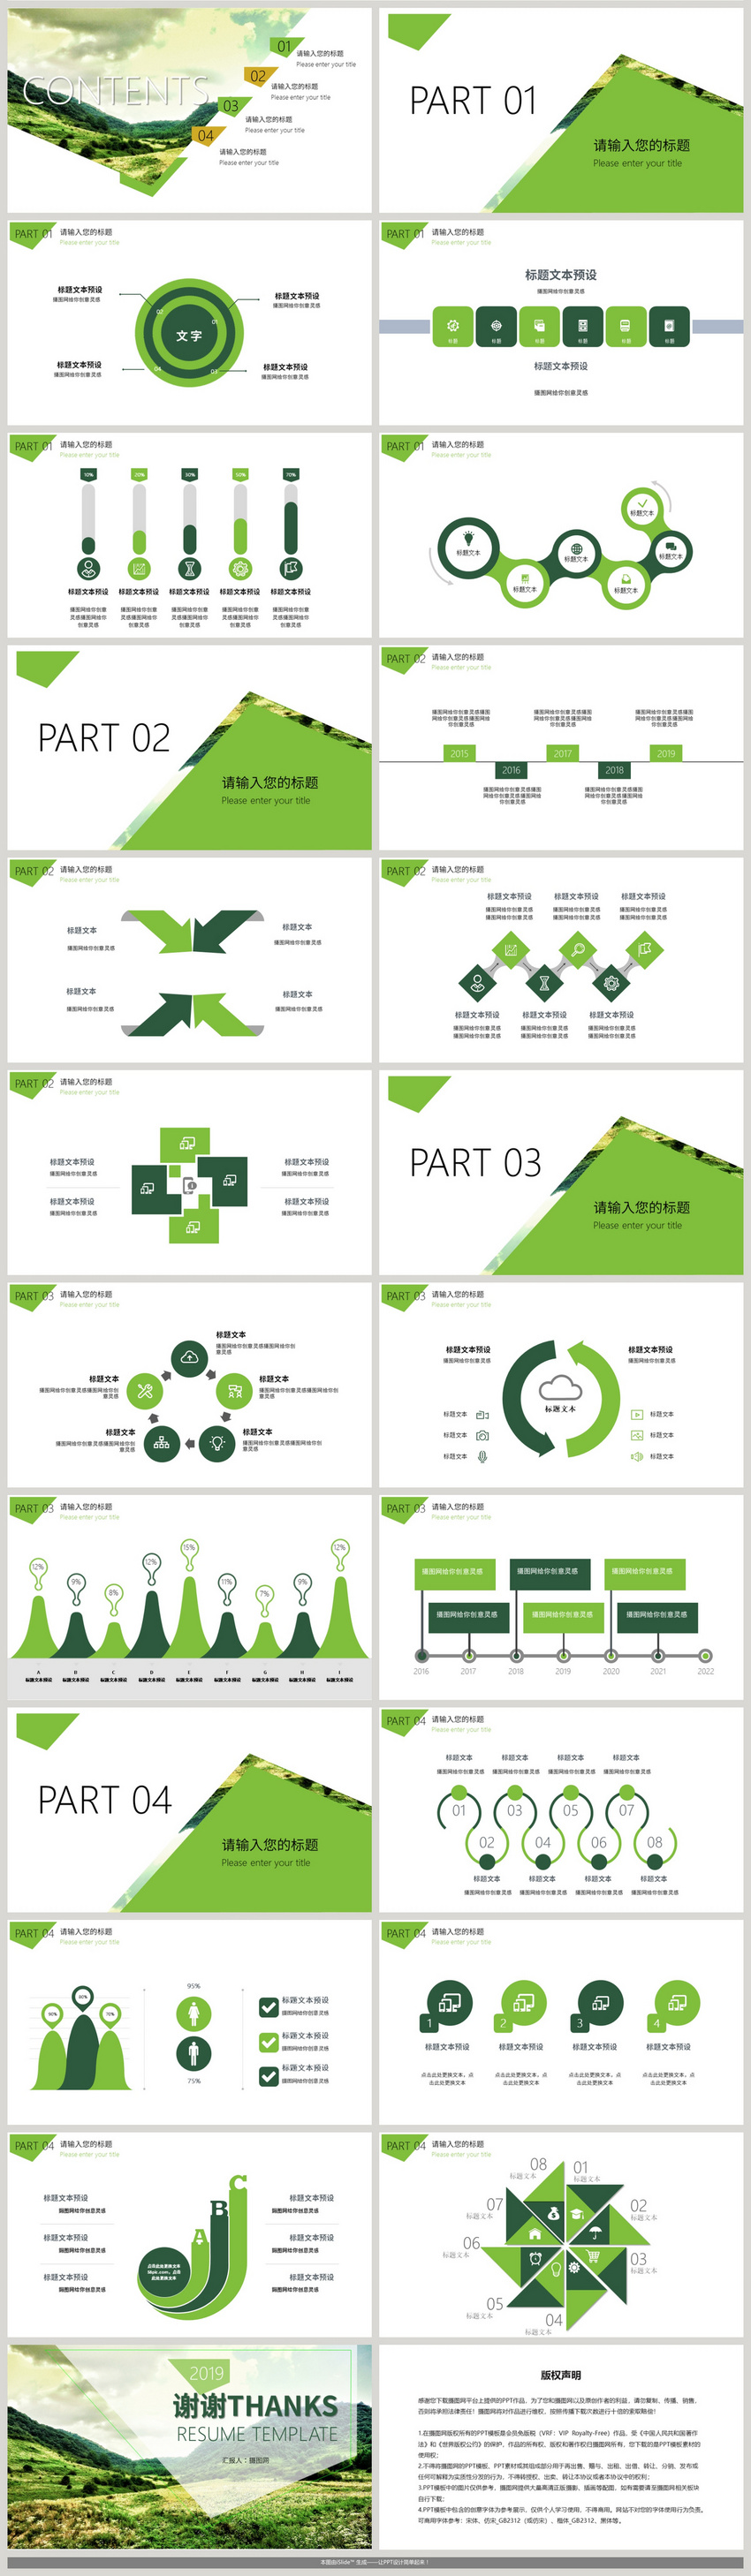 Green Eco Universal Ppt Template Powerpoint Templete_Ppt Free Download  401263507_Lovepik.Com